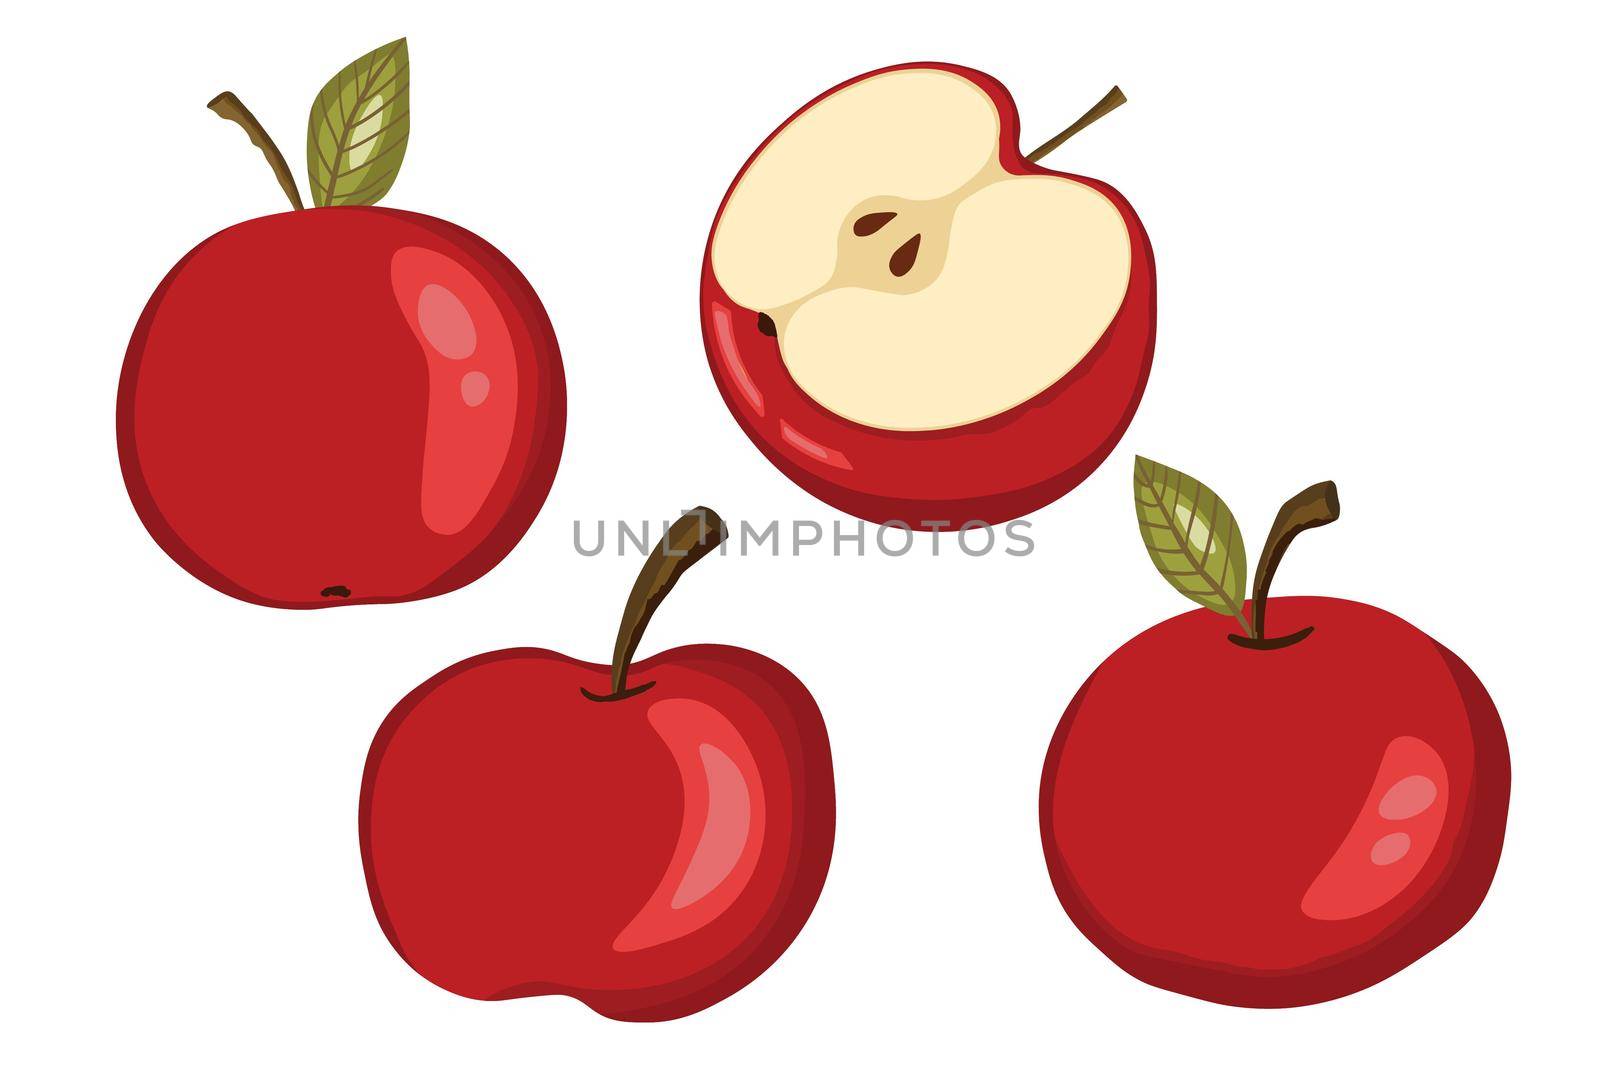 Apple icon set solated on white background. Natural delicious fresh ripe tasty fruit. Template vector illustration for packaging, banner, card. Stylized apples with leaves, apple slice. Food concept by allaku